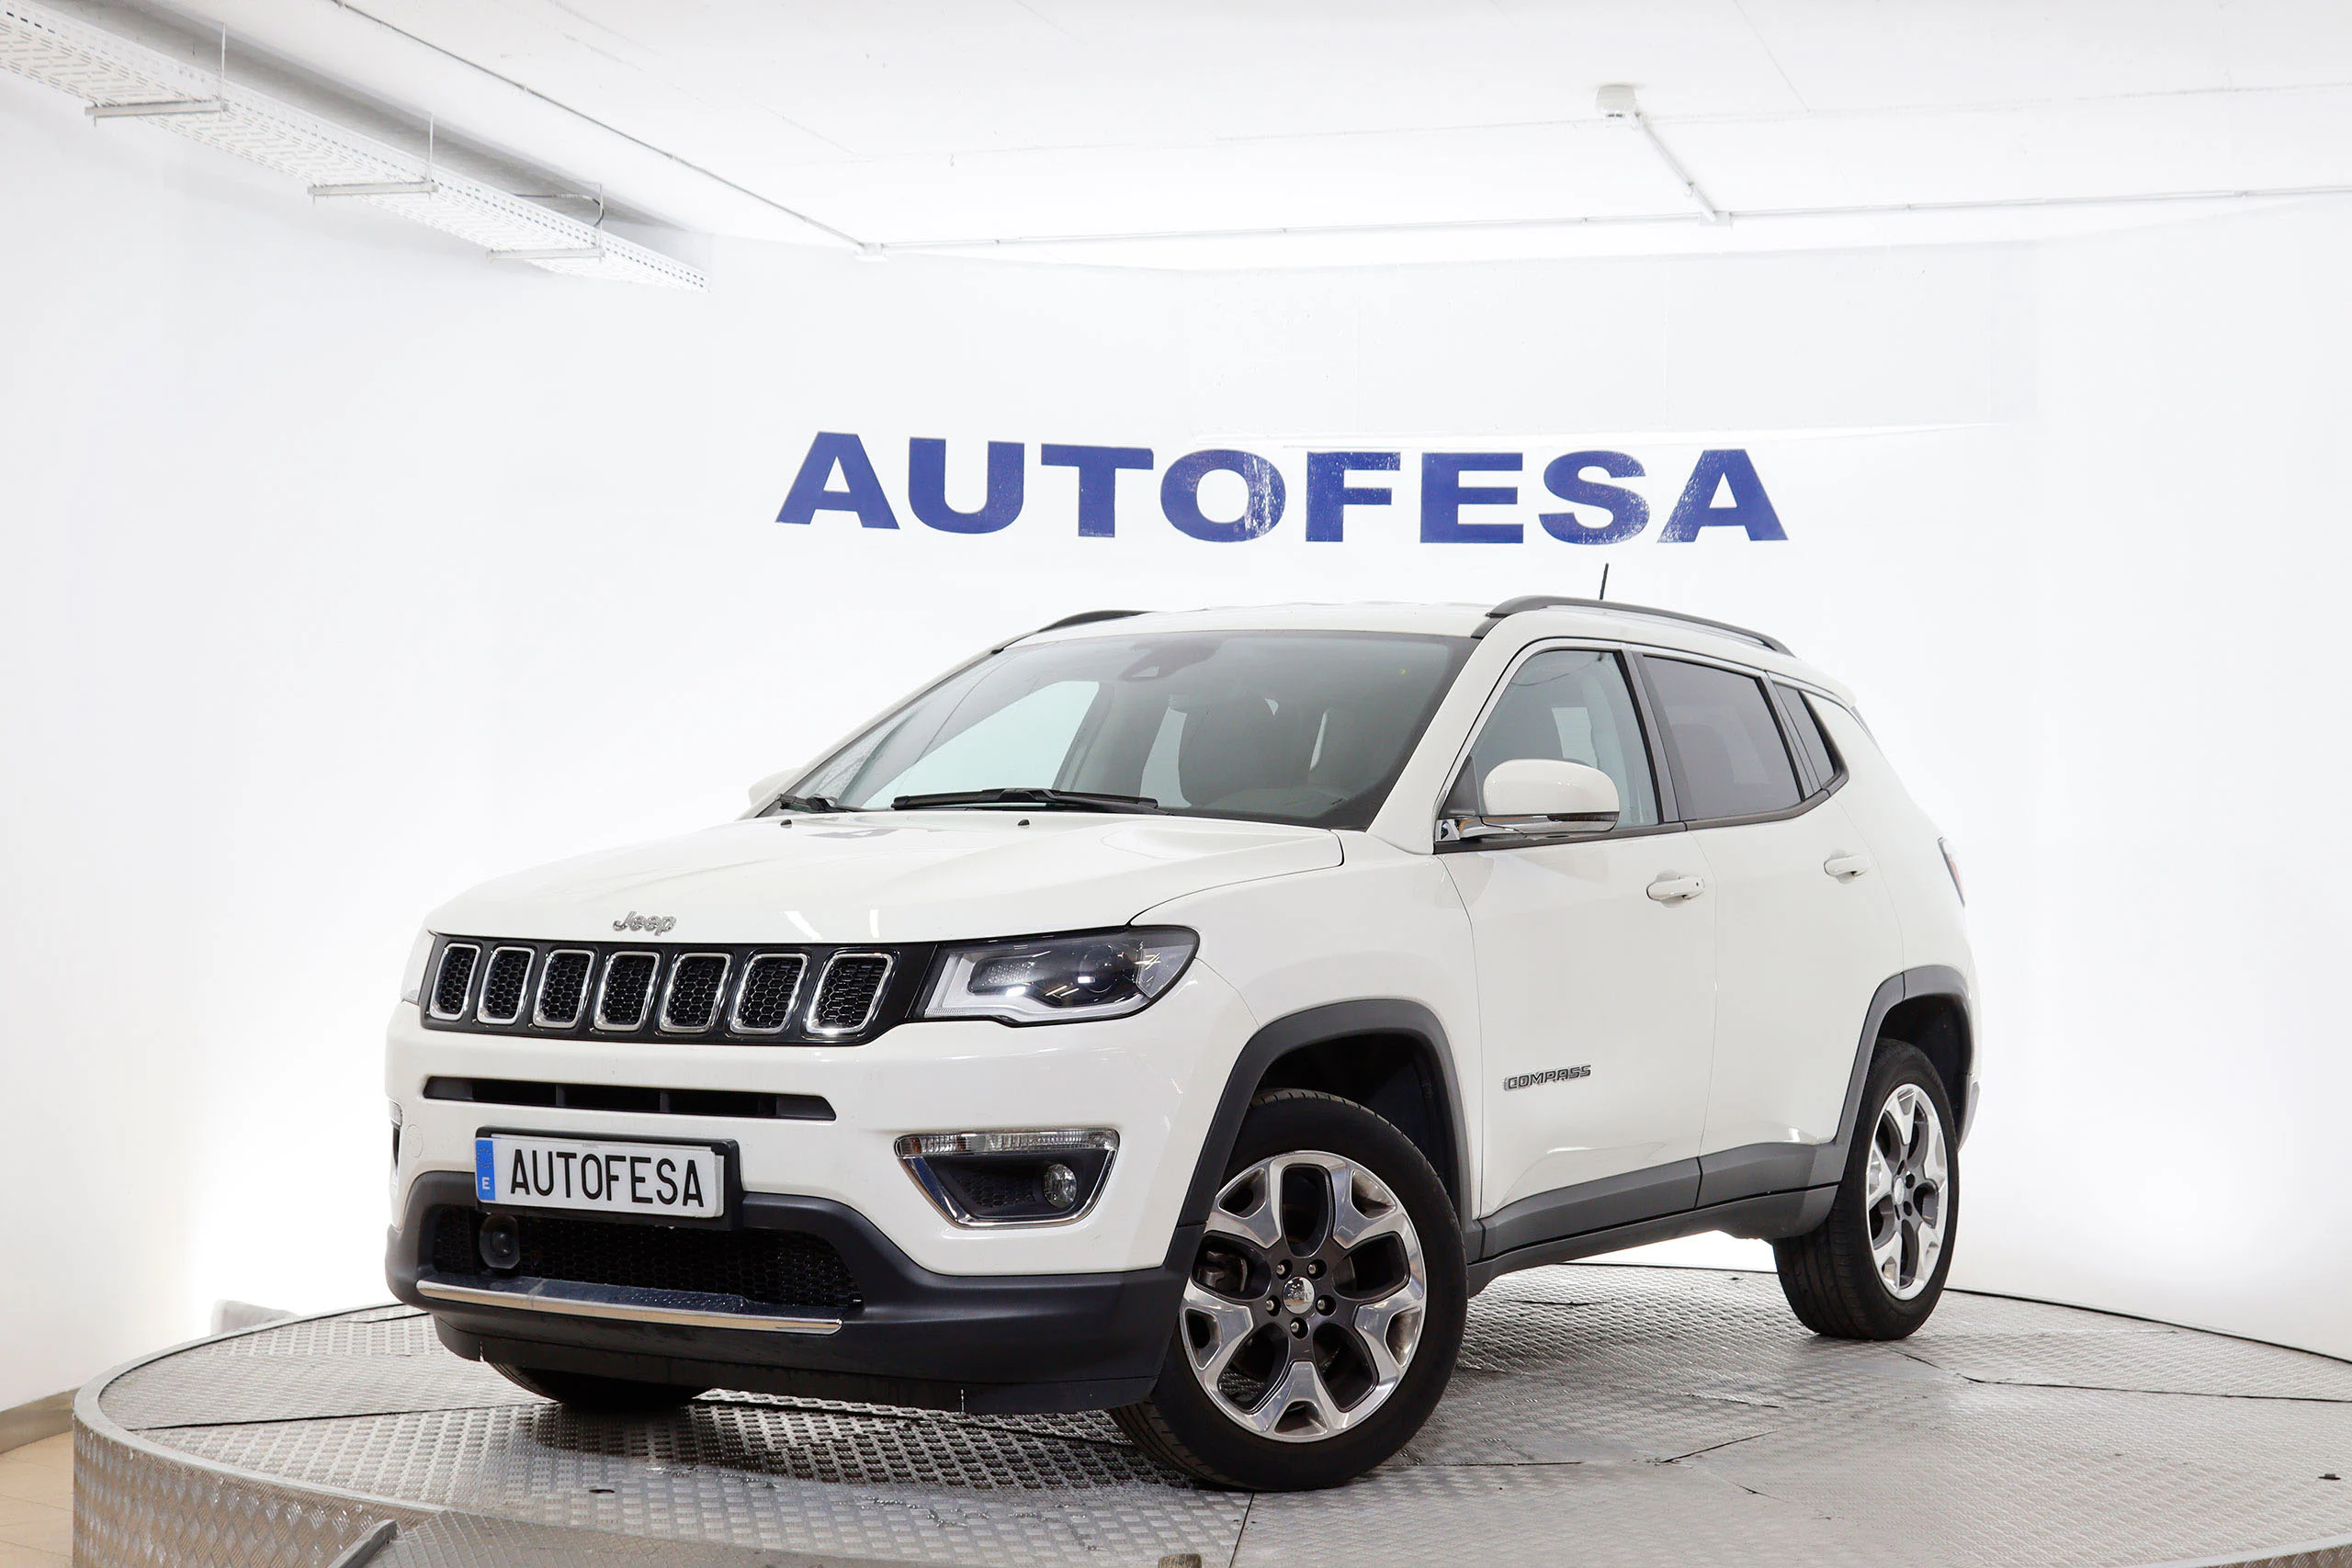 Jeep Compass 2.0 Limited 4X4 170cv Auto 5P S/S # IVA DEDUCIBLE, NAVY, FAROS LED, PARKTRONIC - Foto 1